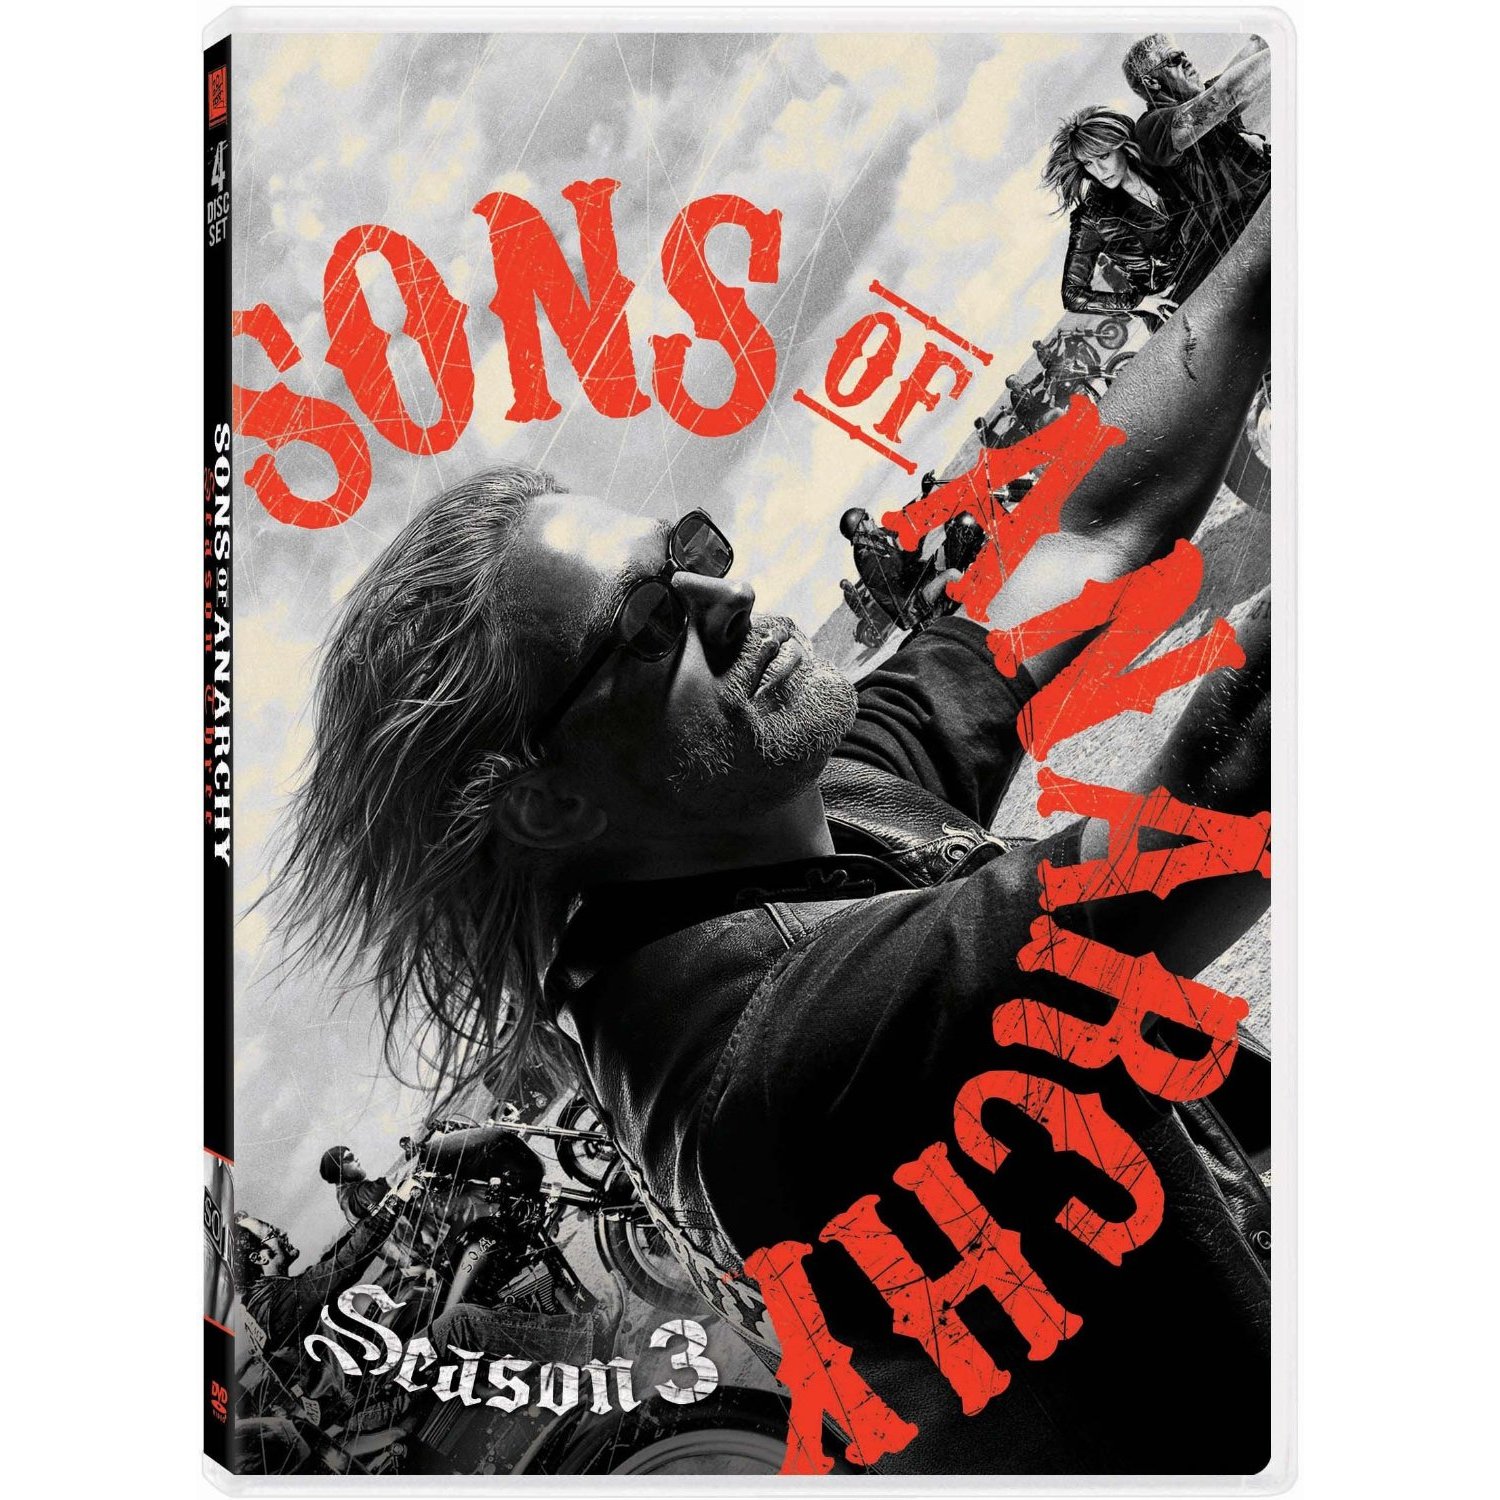 Sons of Anarchy Season 3 Disk 1